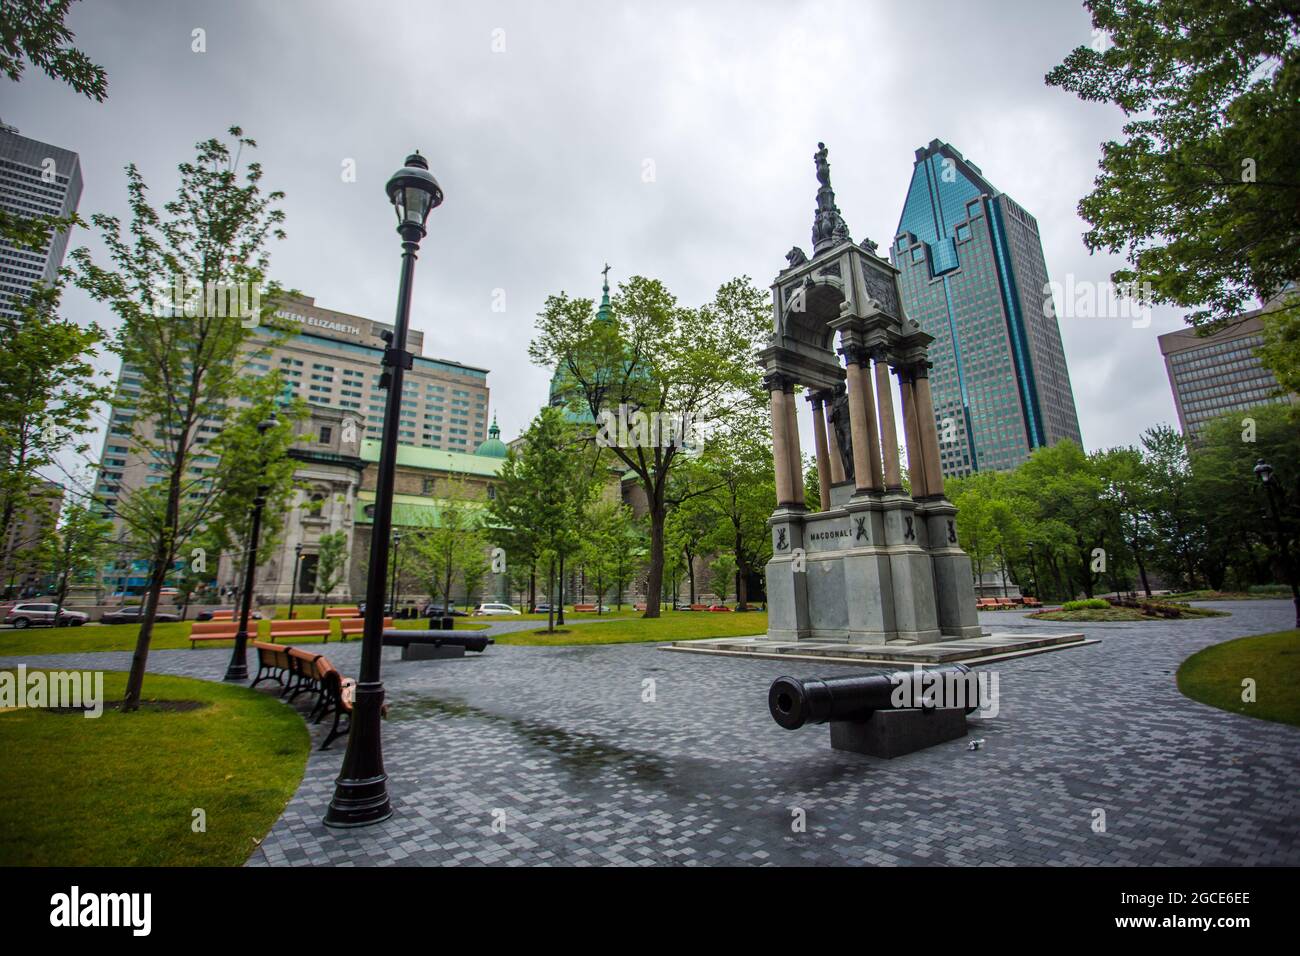 Statue of Sir John A Macdonald, the first Prime Minister of Canada at Montreal, Quebec. Stock Photo